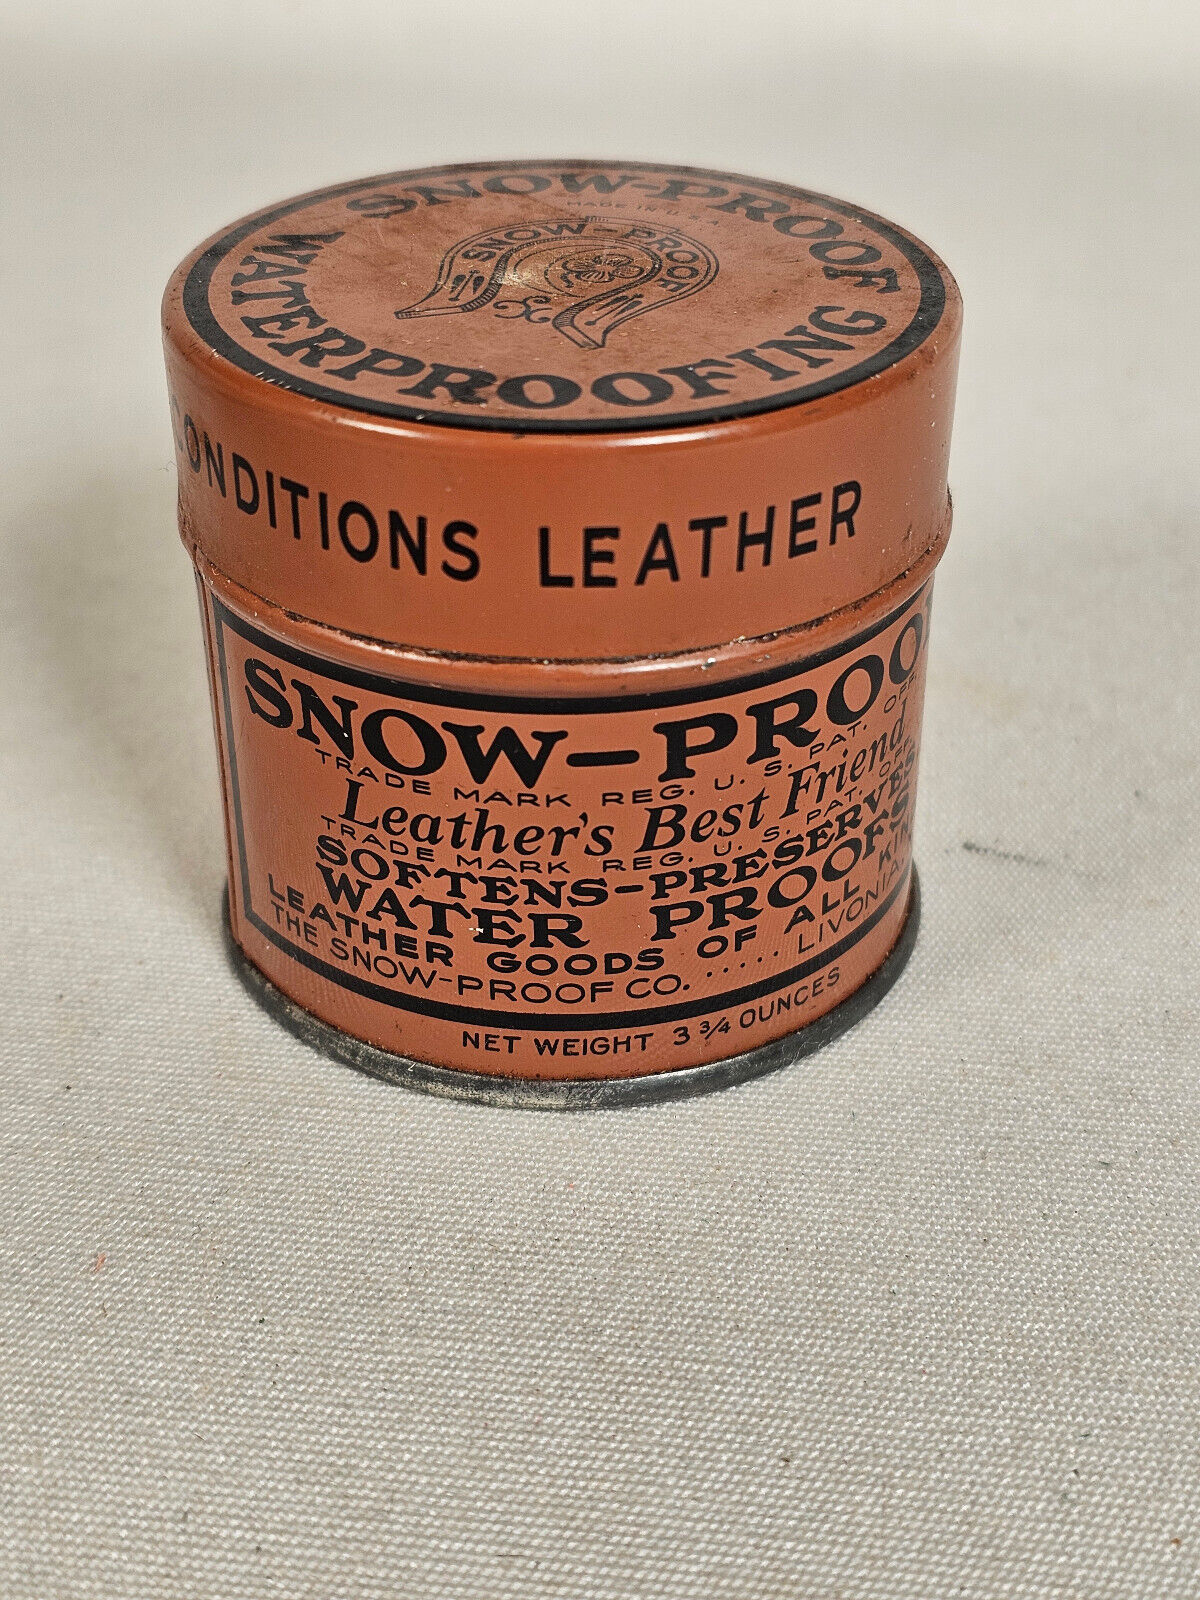 VINTAGE SNOW-PROOF WATERPROOFING LEATHER\'S BEST FRIEND CIRCULAR TIN LIVONIA, NY